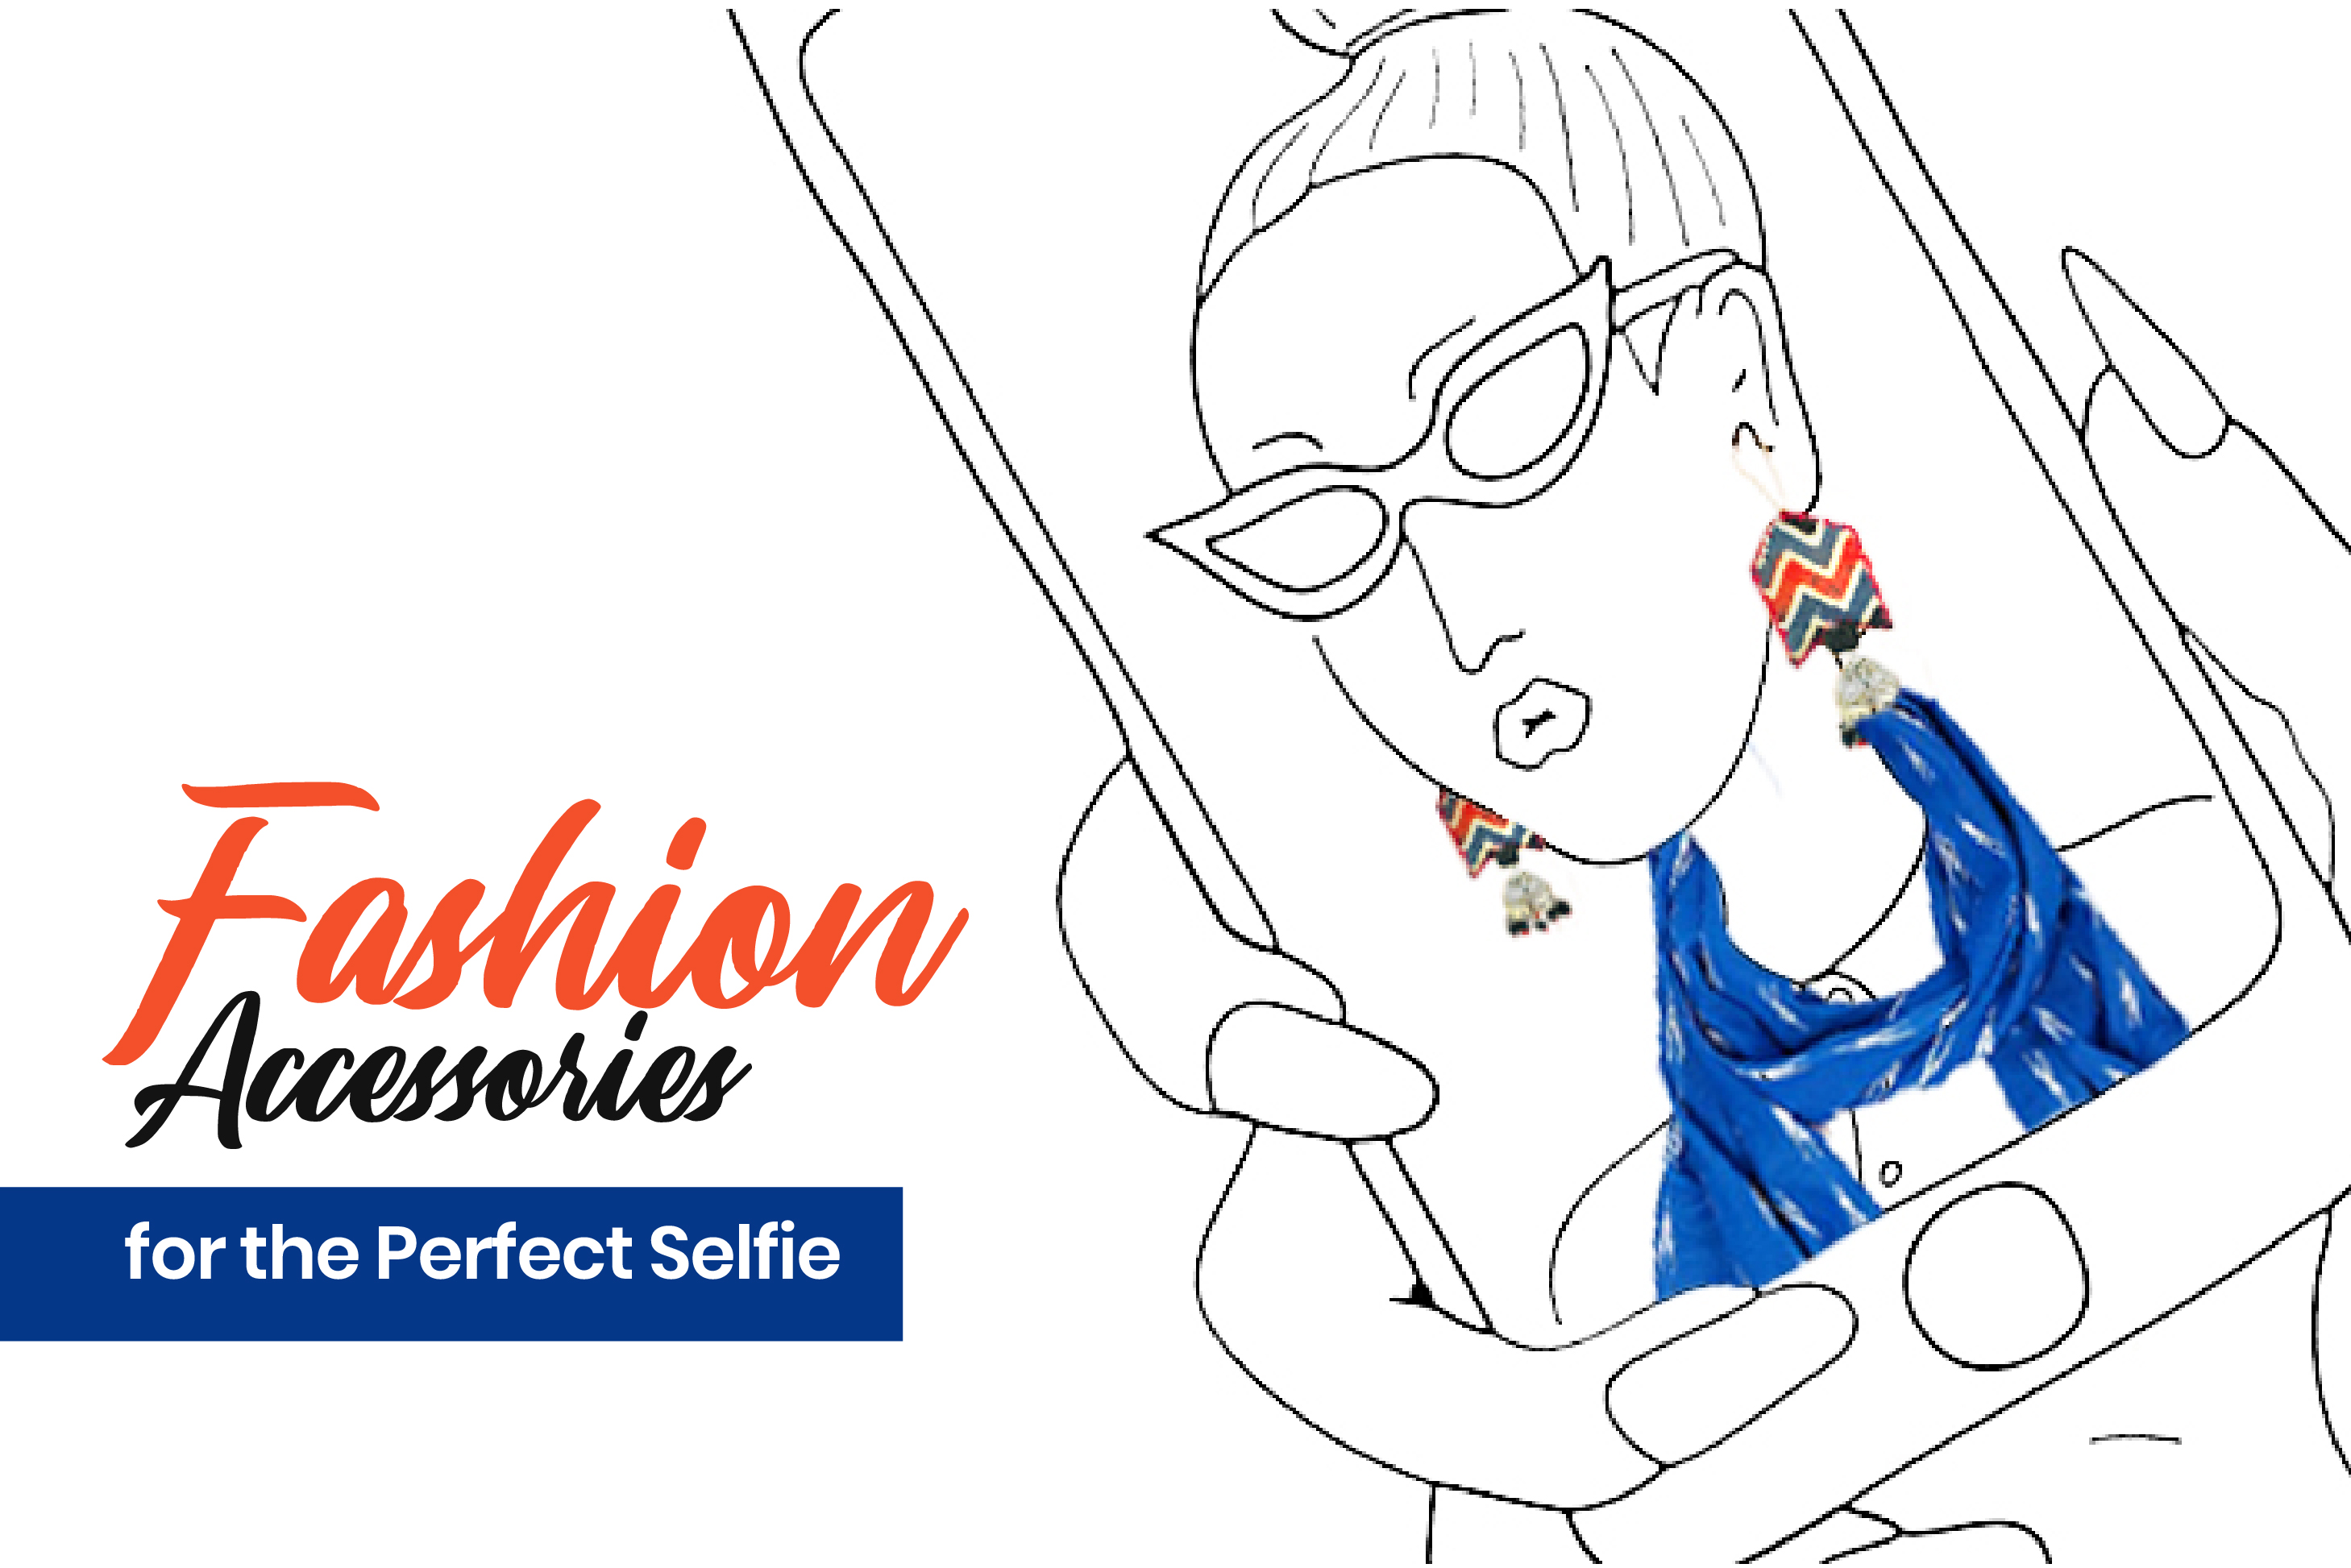 Fashion Accessories for the Perfect Selfie